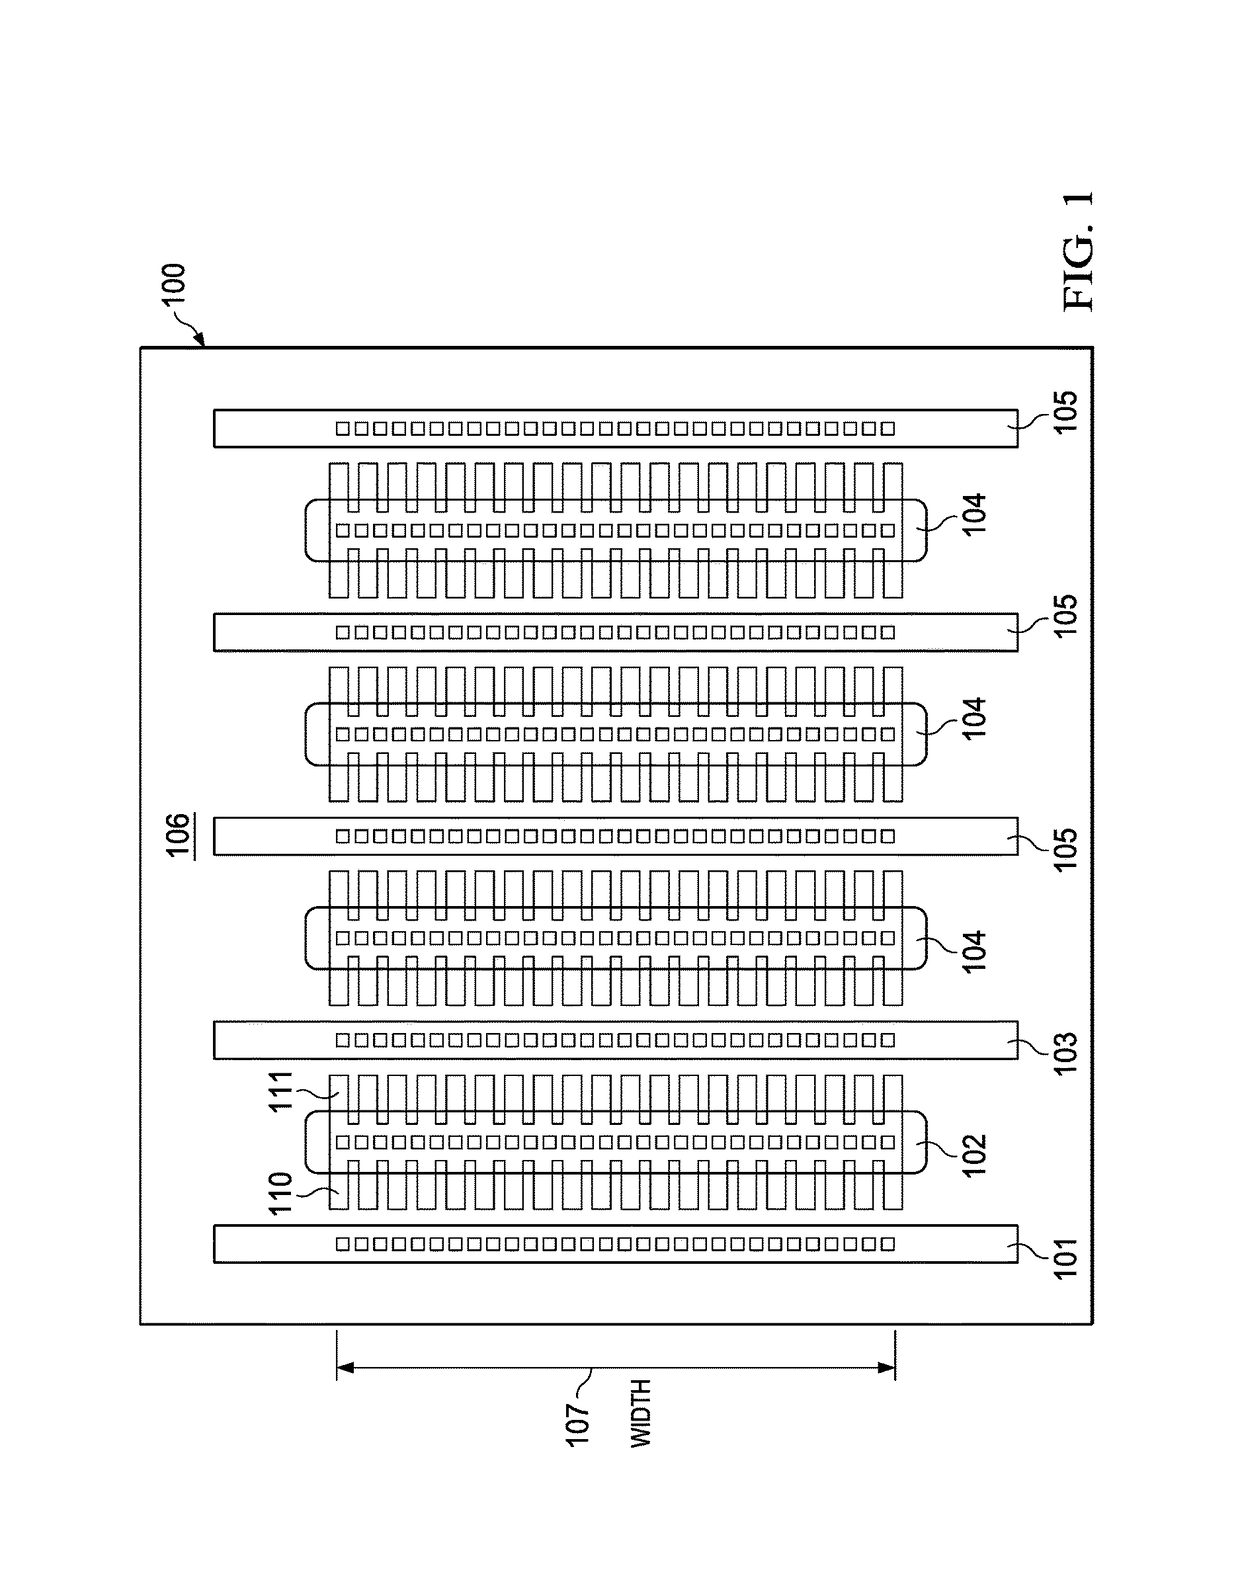 Laterally diffused metal oxide semiconductor with segmented gate oxide